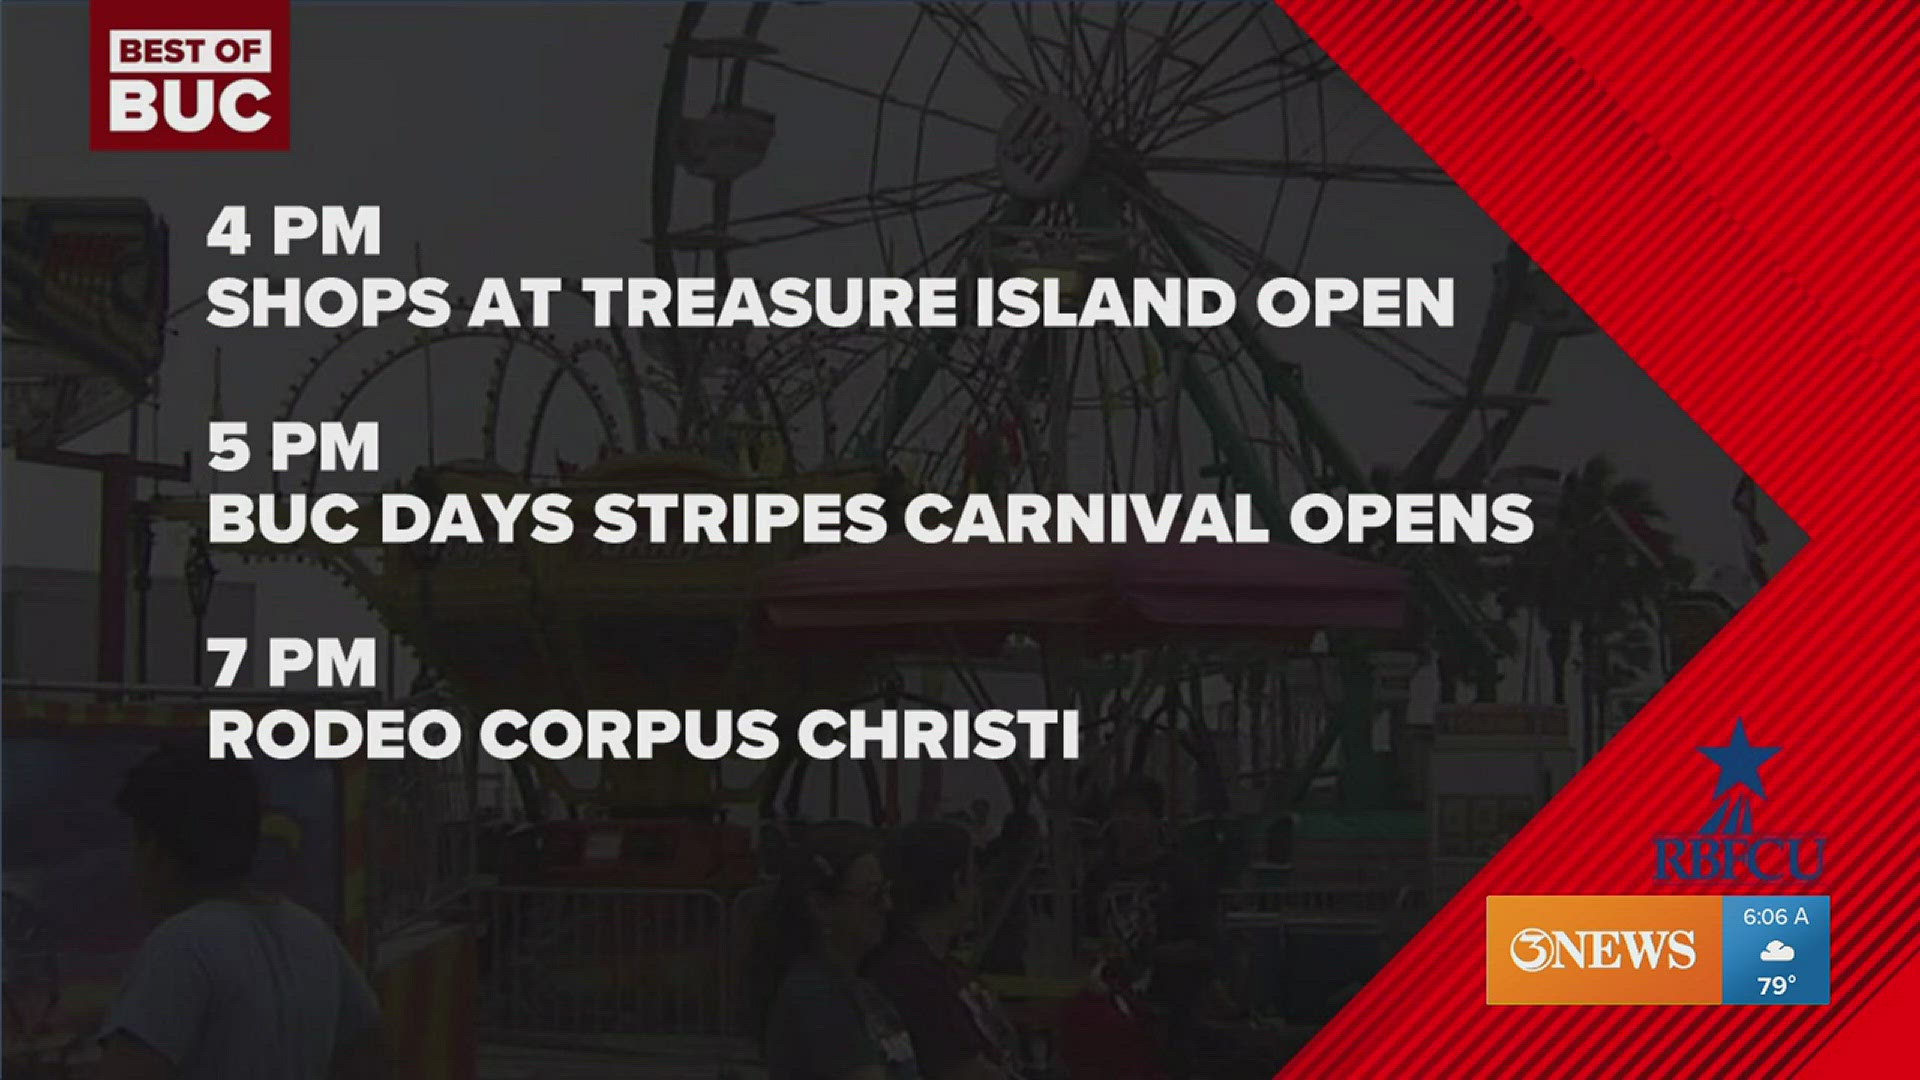 Here's what to look out for if you are heading to Buc Days this Wednesday!